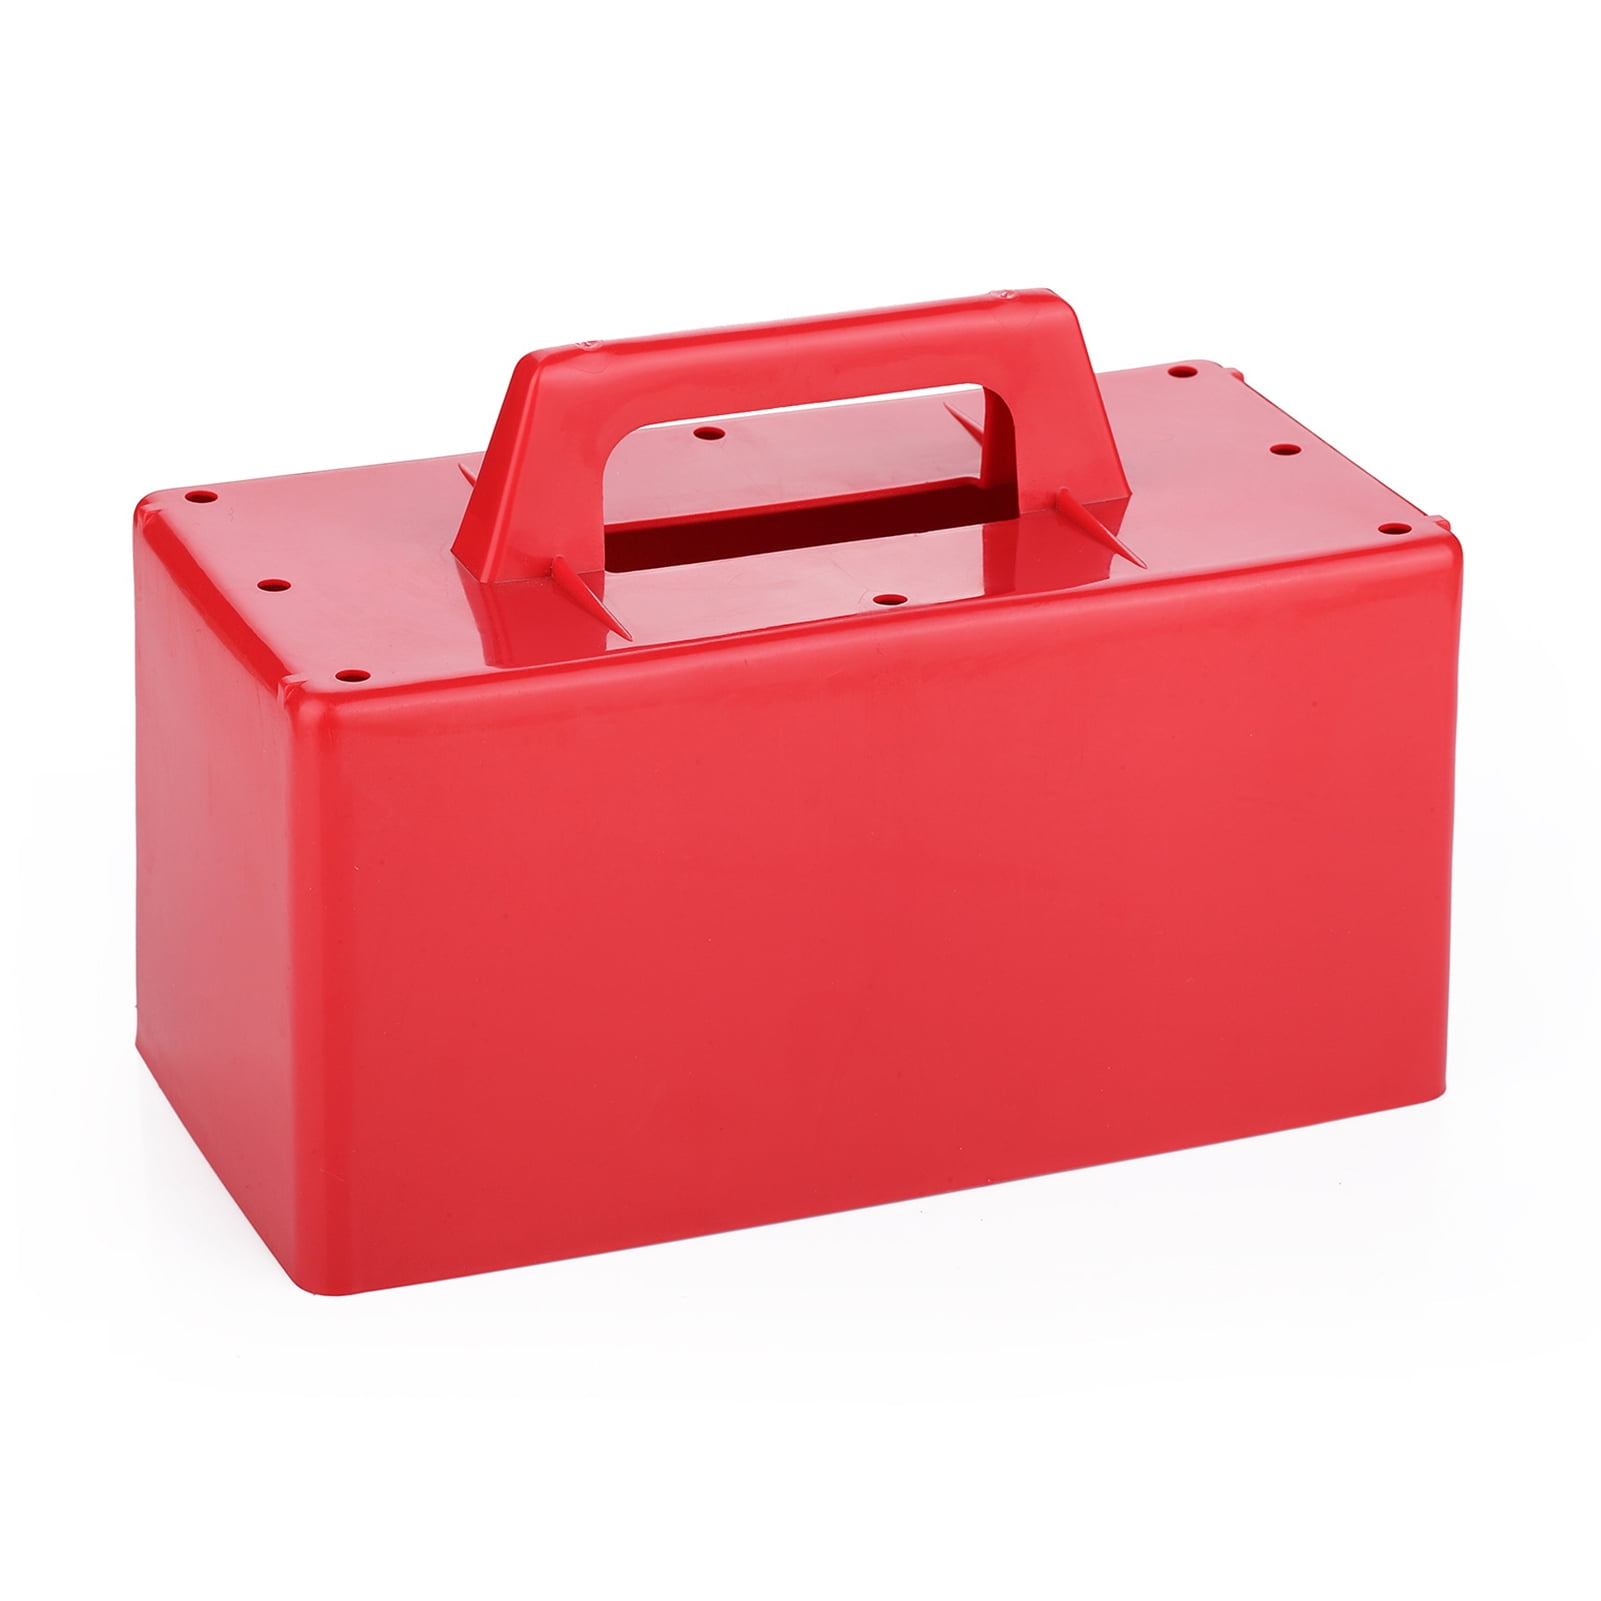 Superio Snow Block Maker - 10-in - Red 447